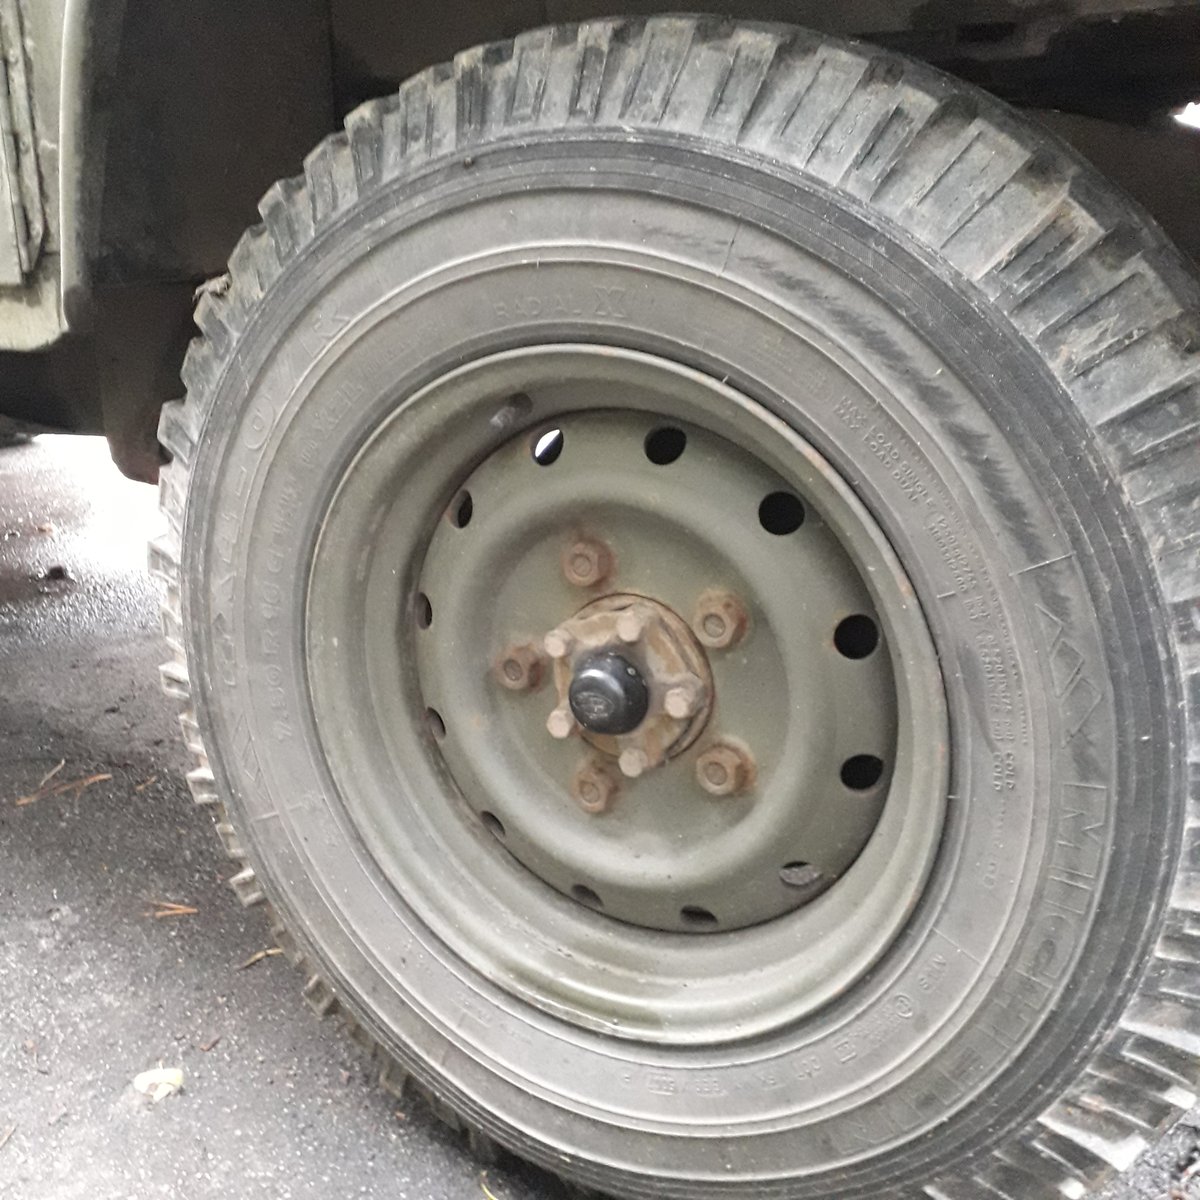 Over the summer, our team had been noticing that the centre hub covers on the wheels of one of our old vehicles kept going missing... (2/5)